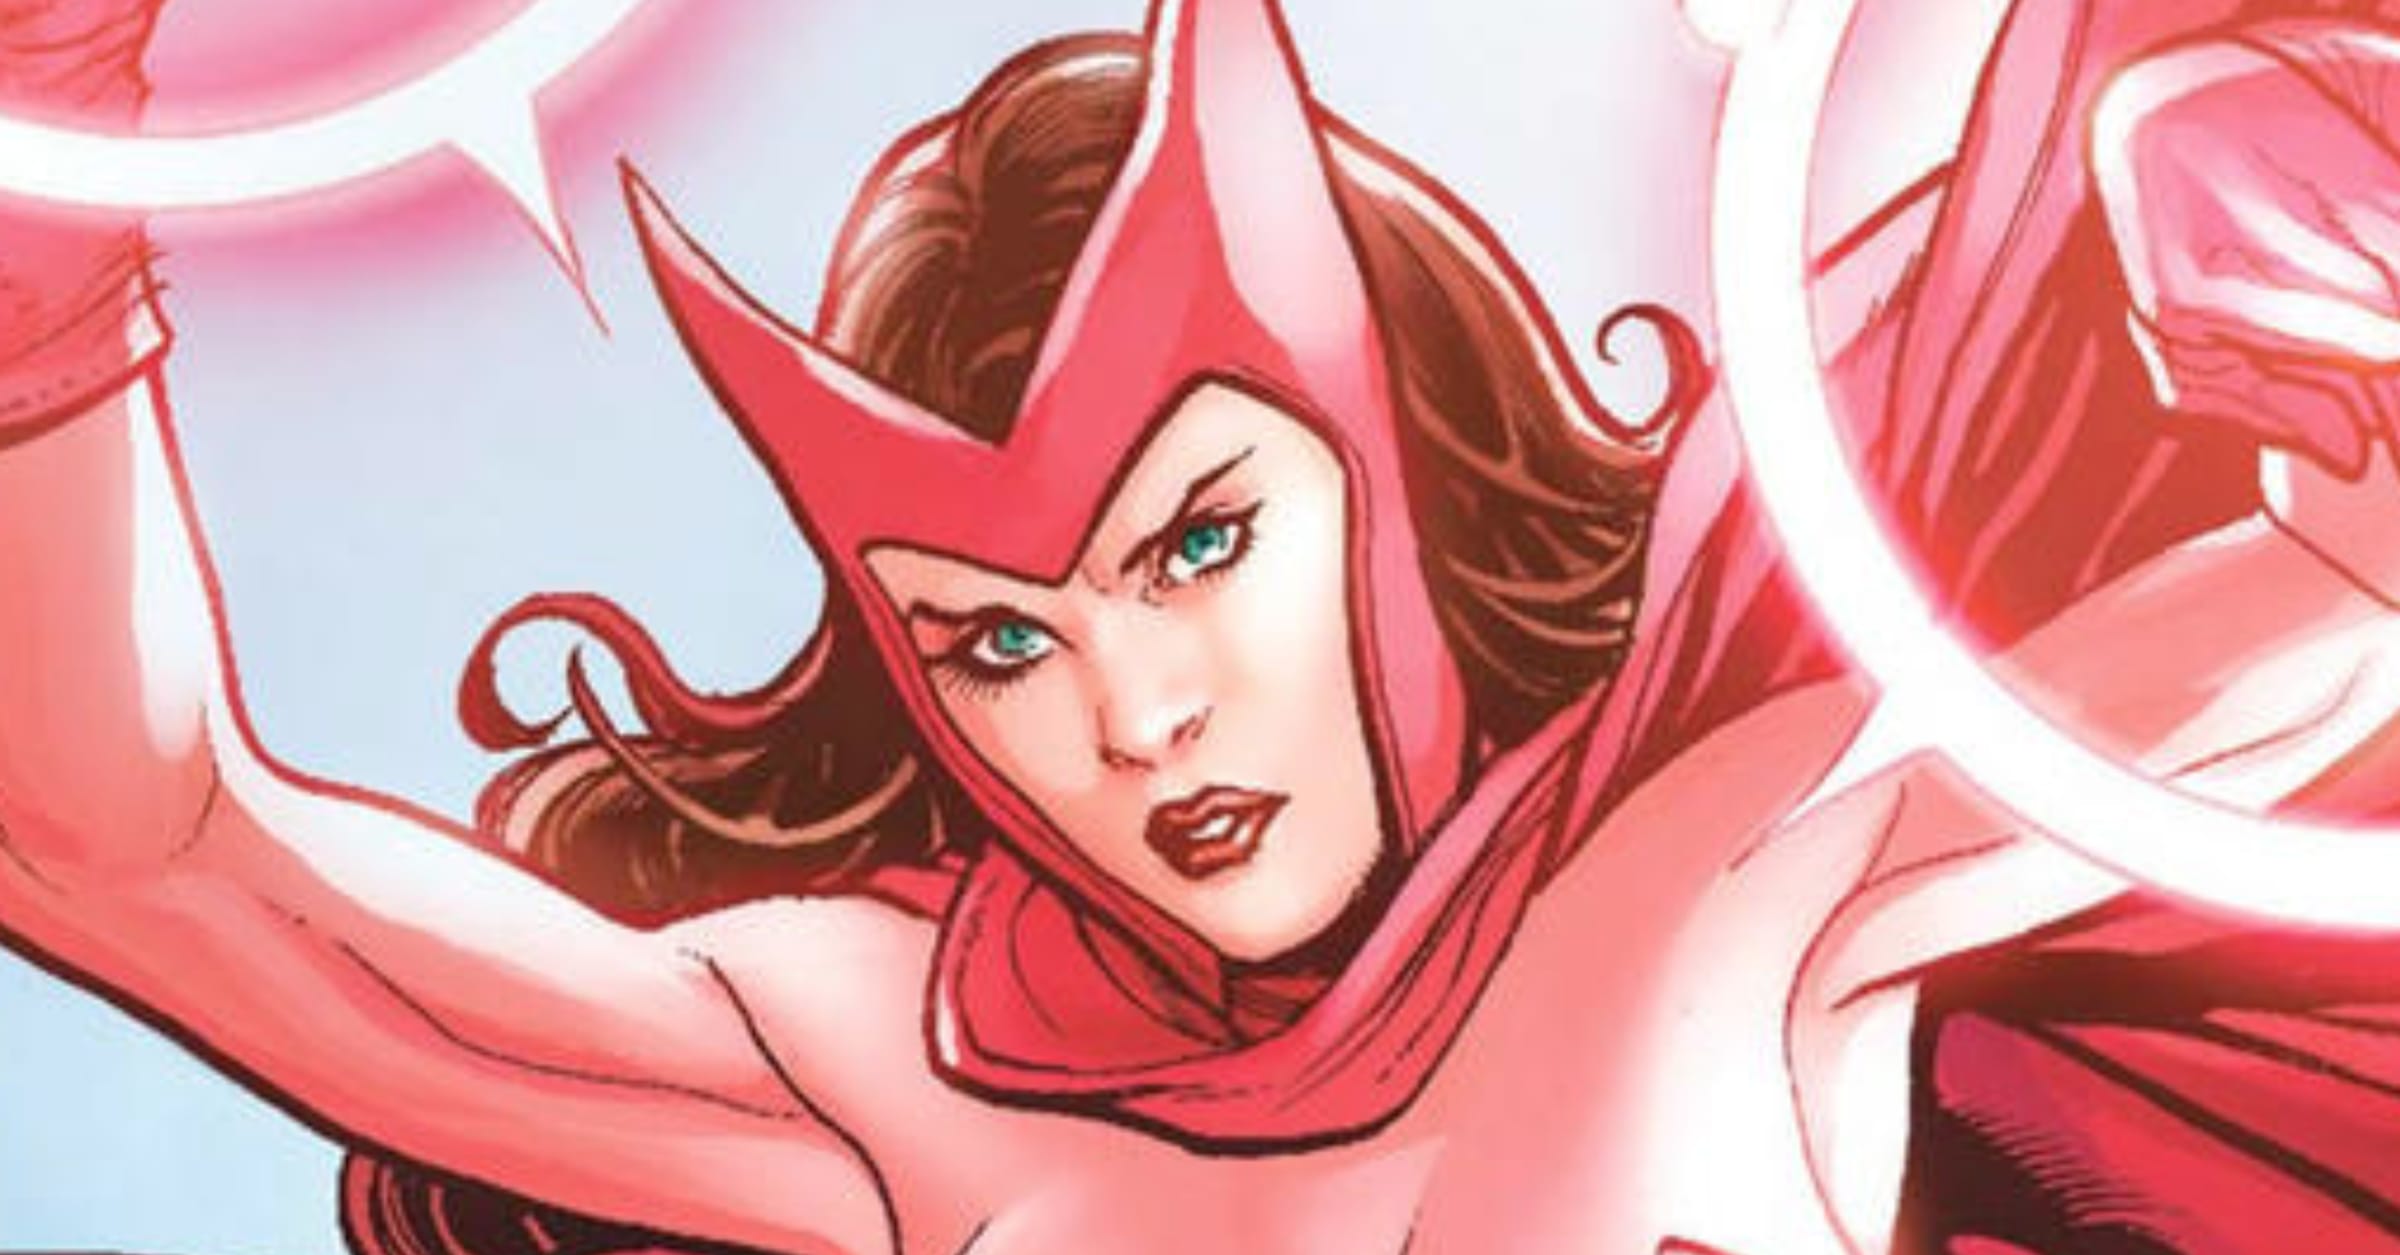 The 10 Best Scarlet Witch Comic Book Storylines, According To Ranker